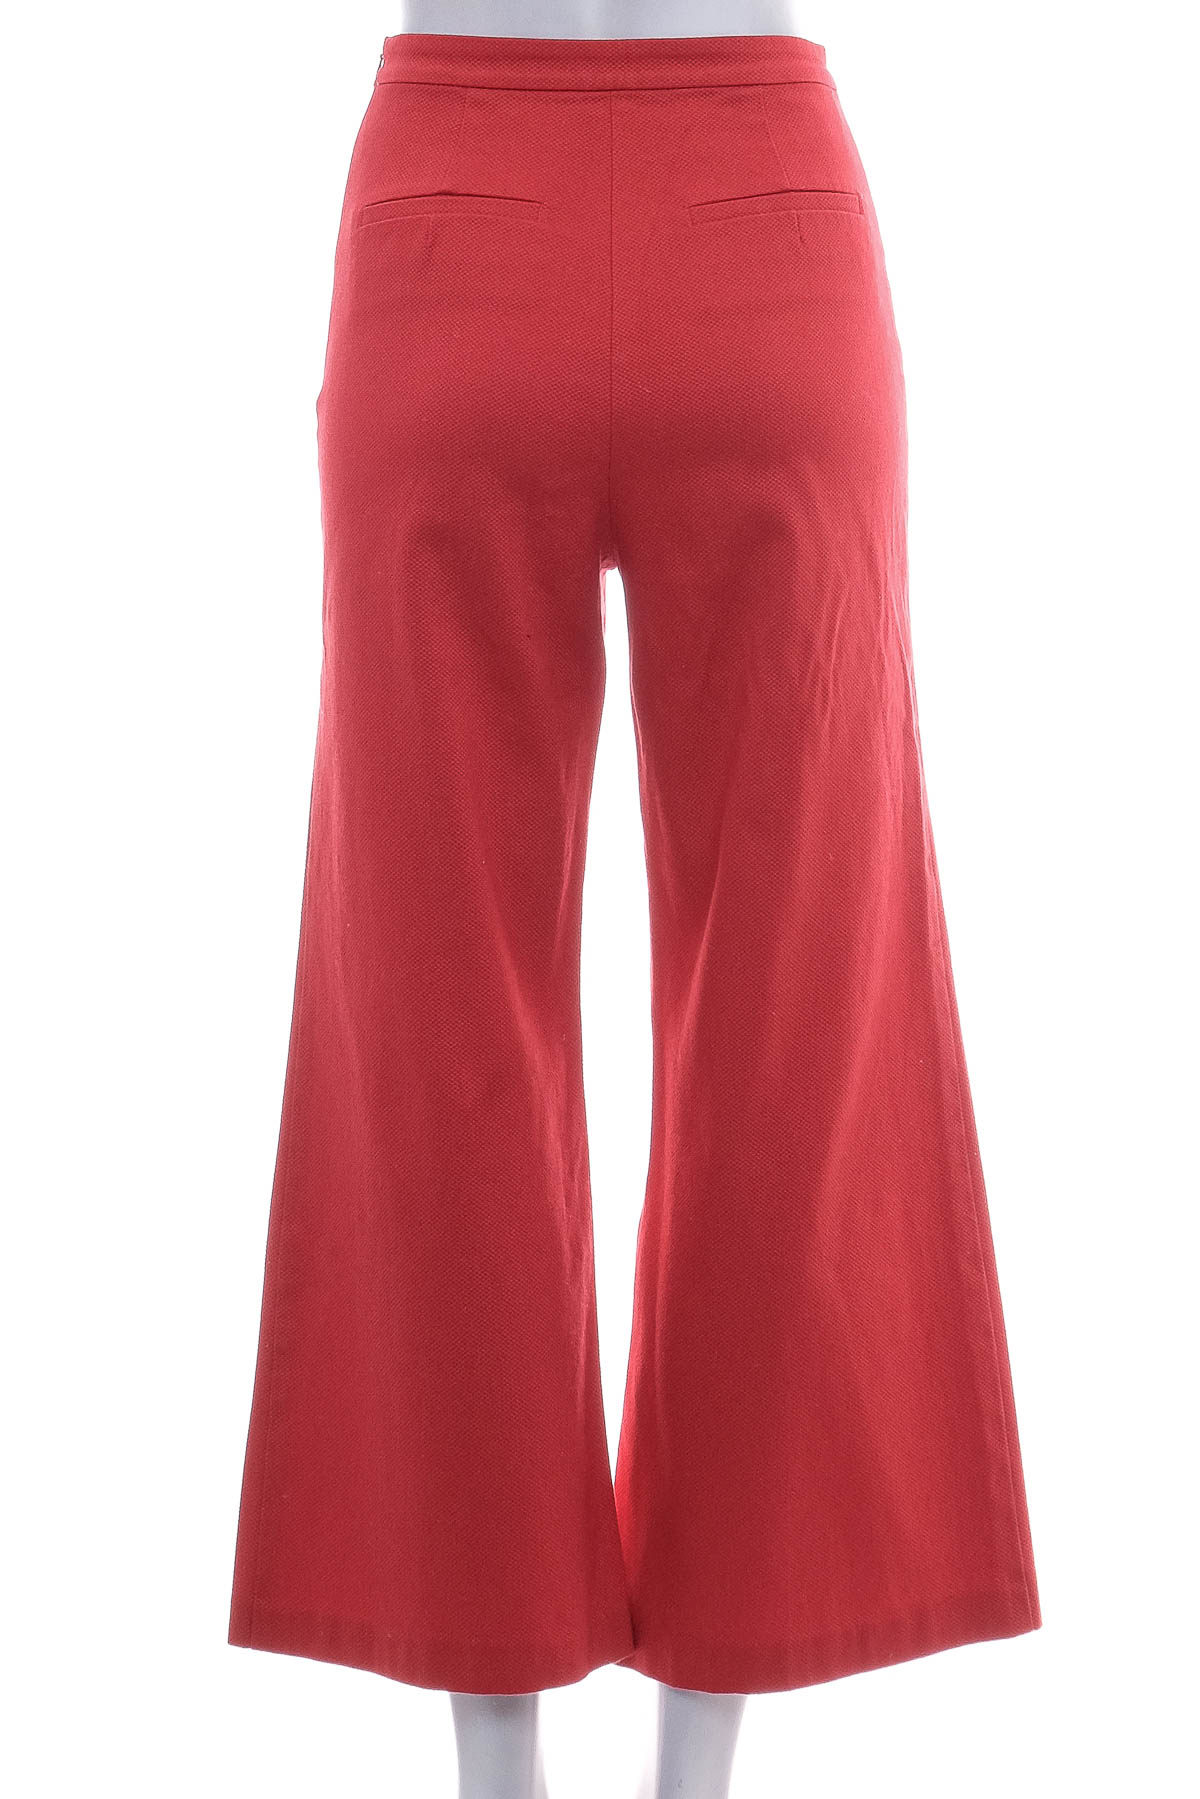 Women's trousers - Max&Co. - 1